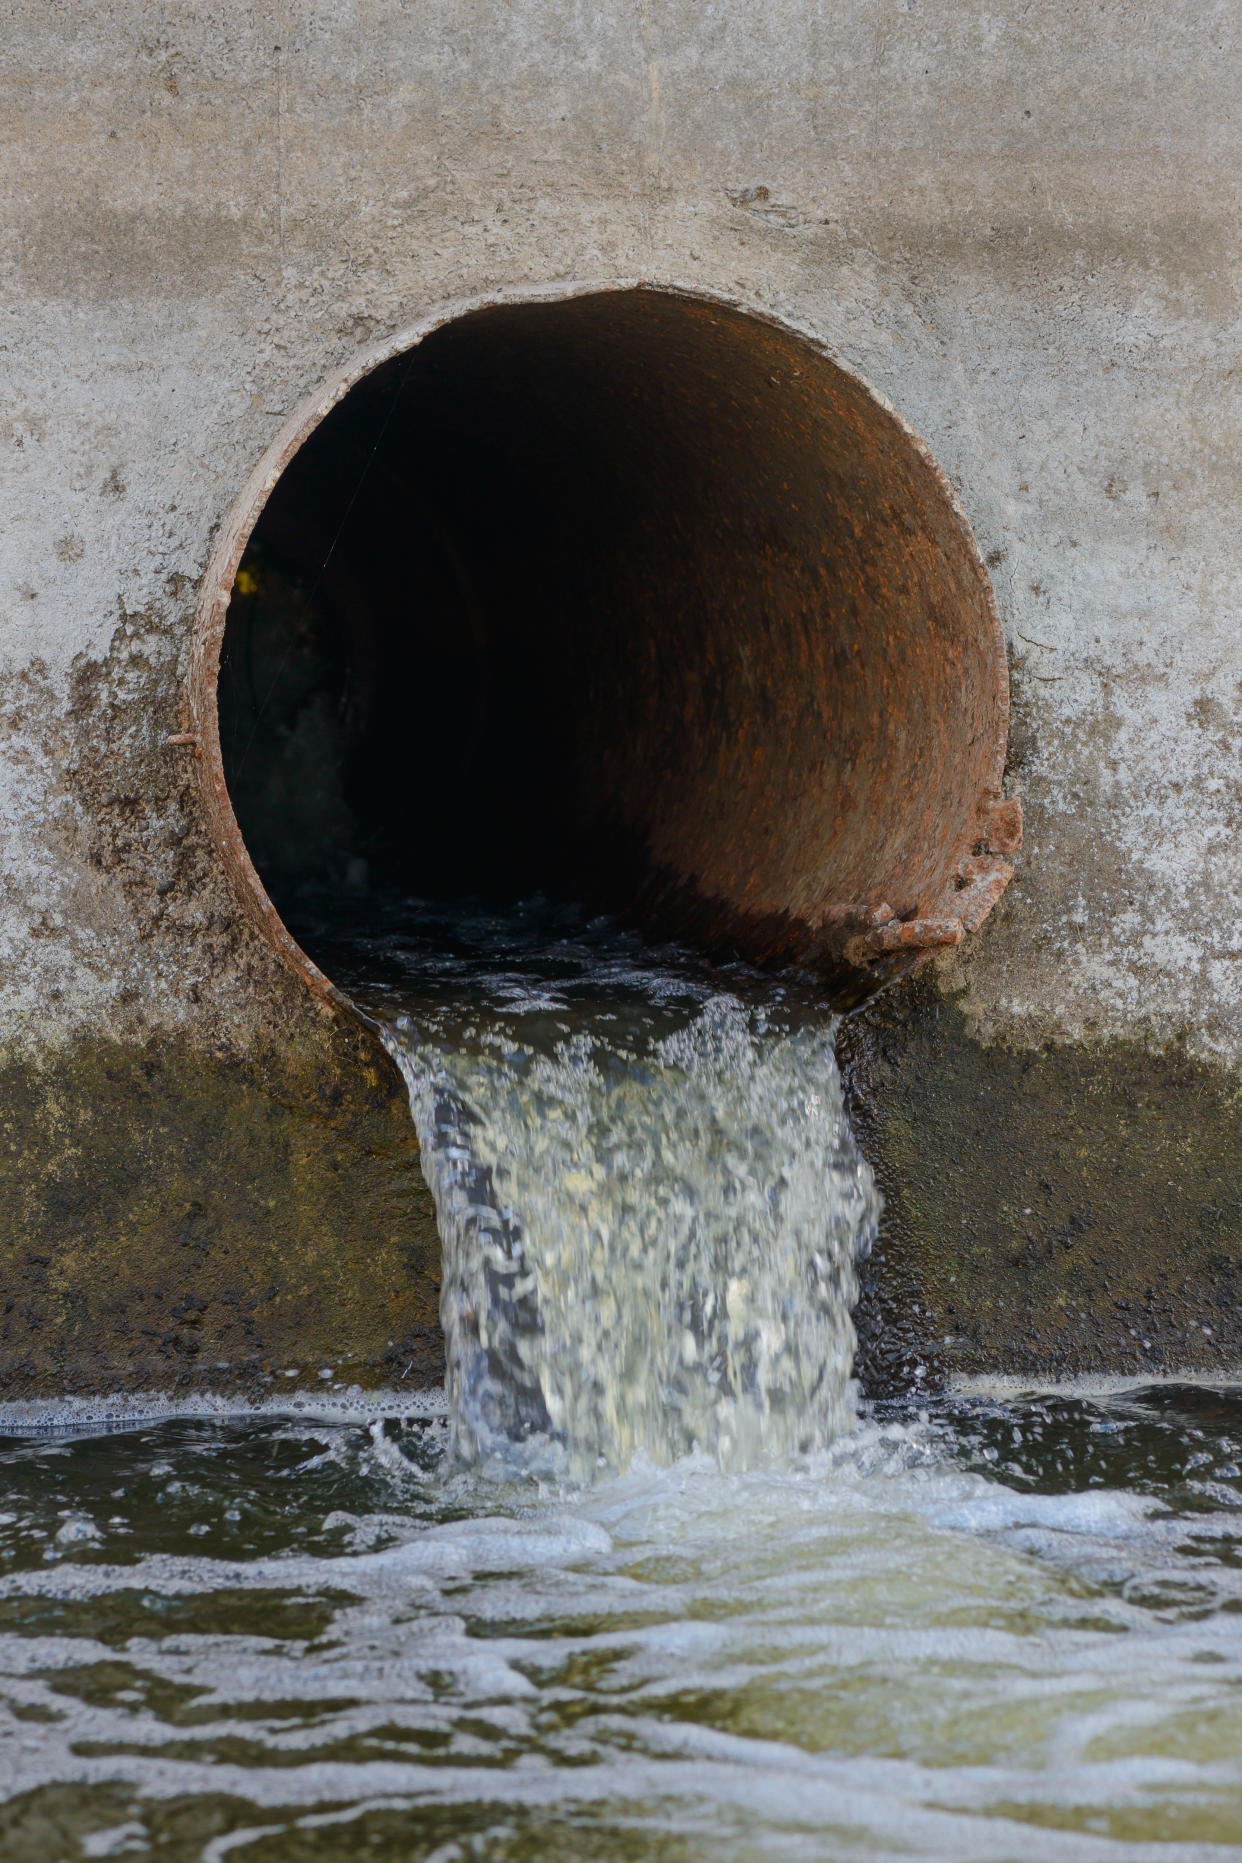 Sewage drainage or drainage pipe with leaking water